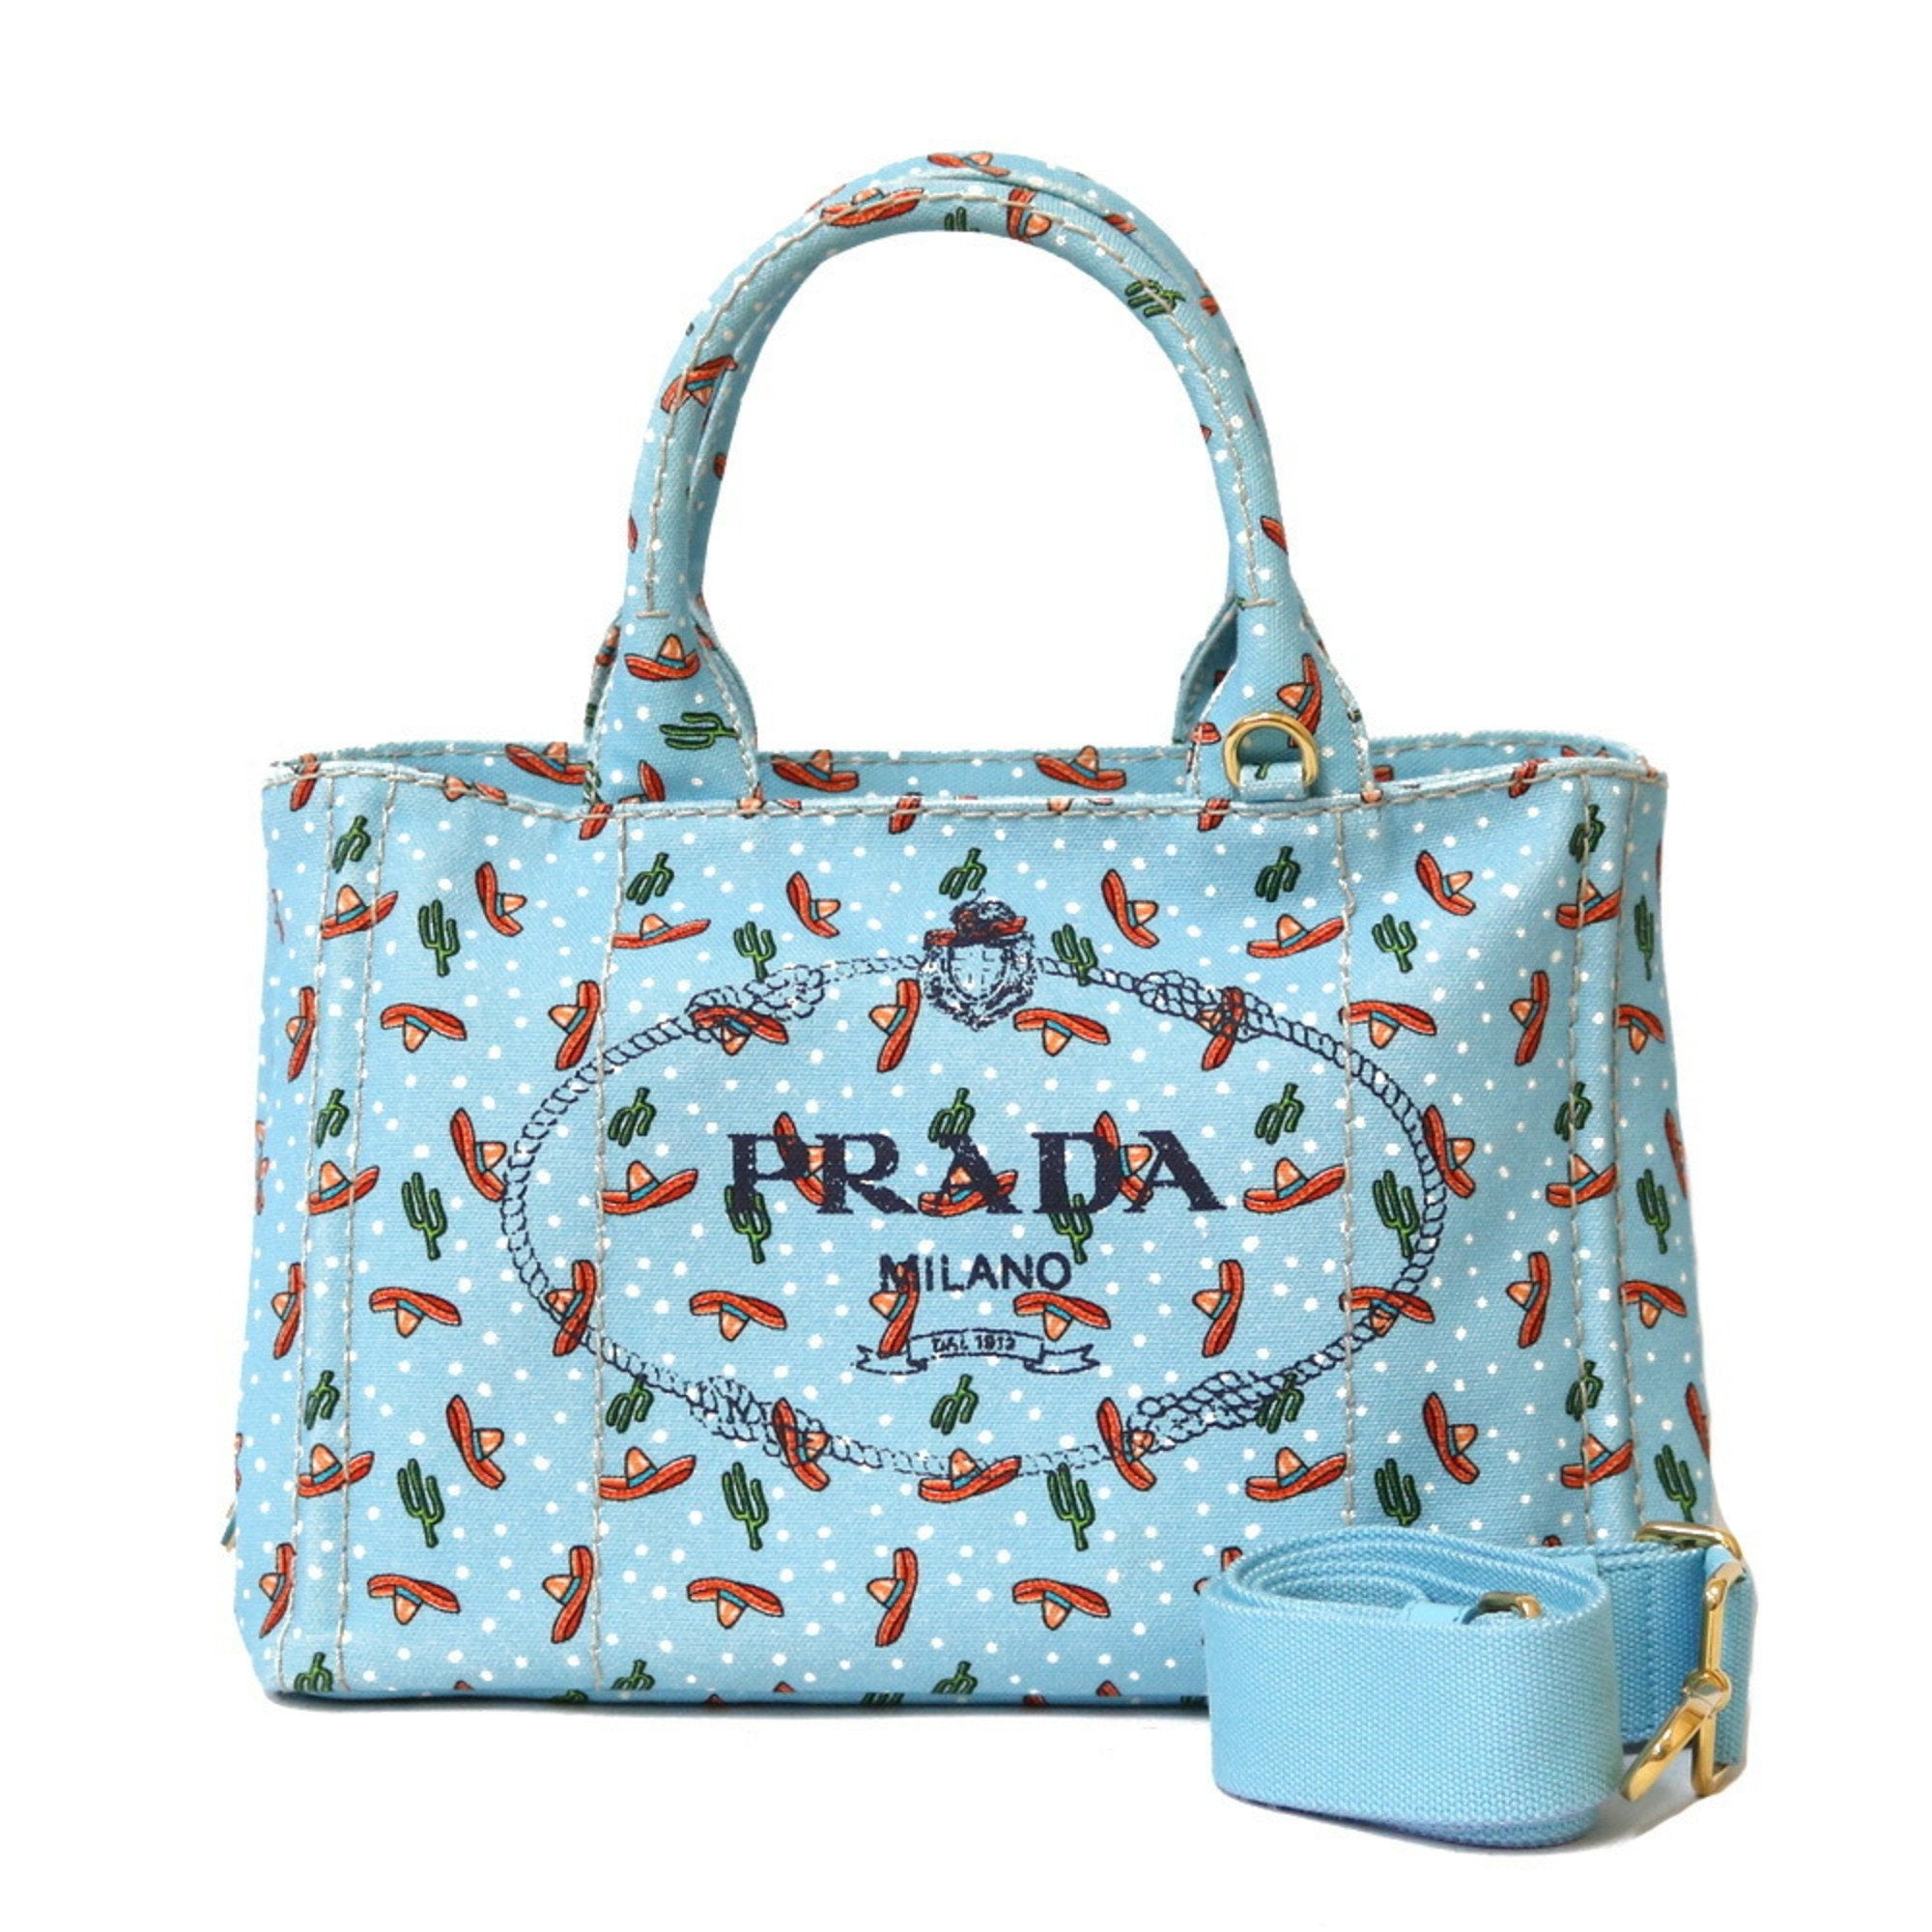 Clapcart Canvas Tote Bag for Women | Printed Multipurpose Cotton Bags |  Cute Hand Bag for Girls (My Other Bags are Prada)